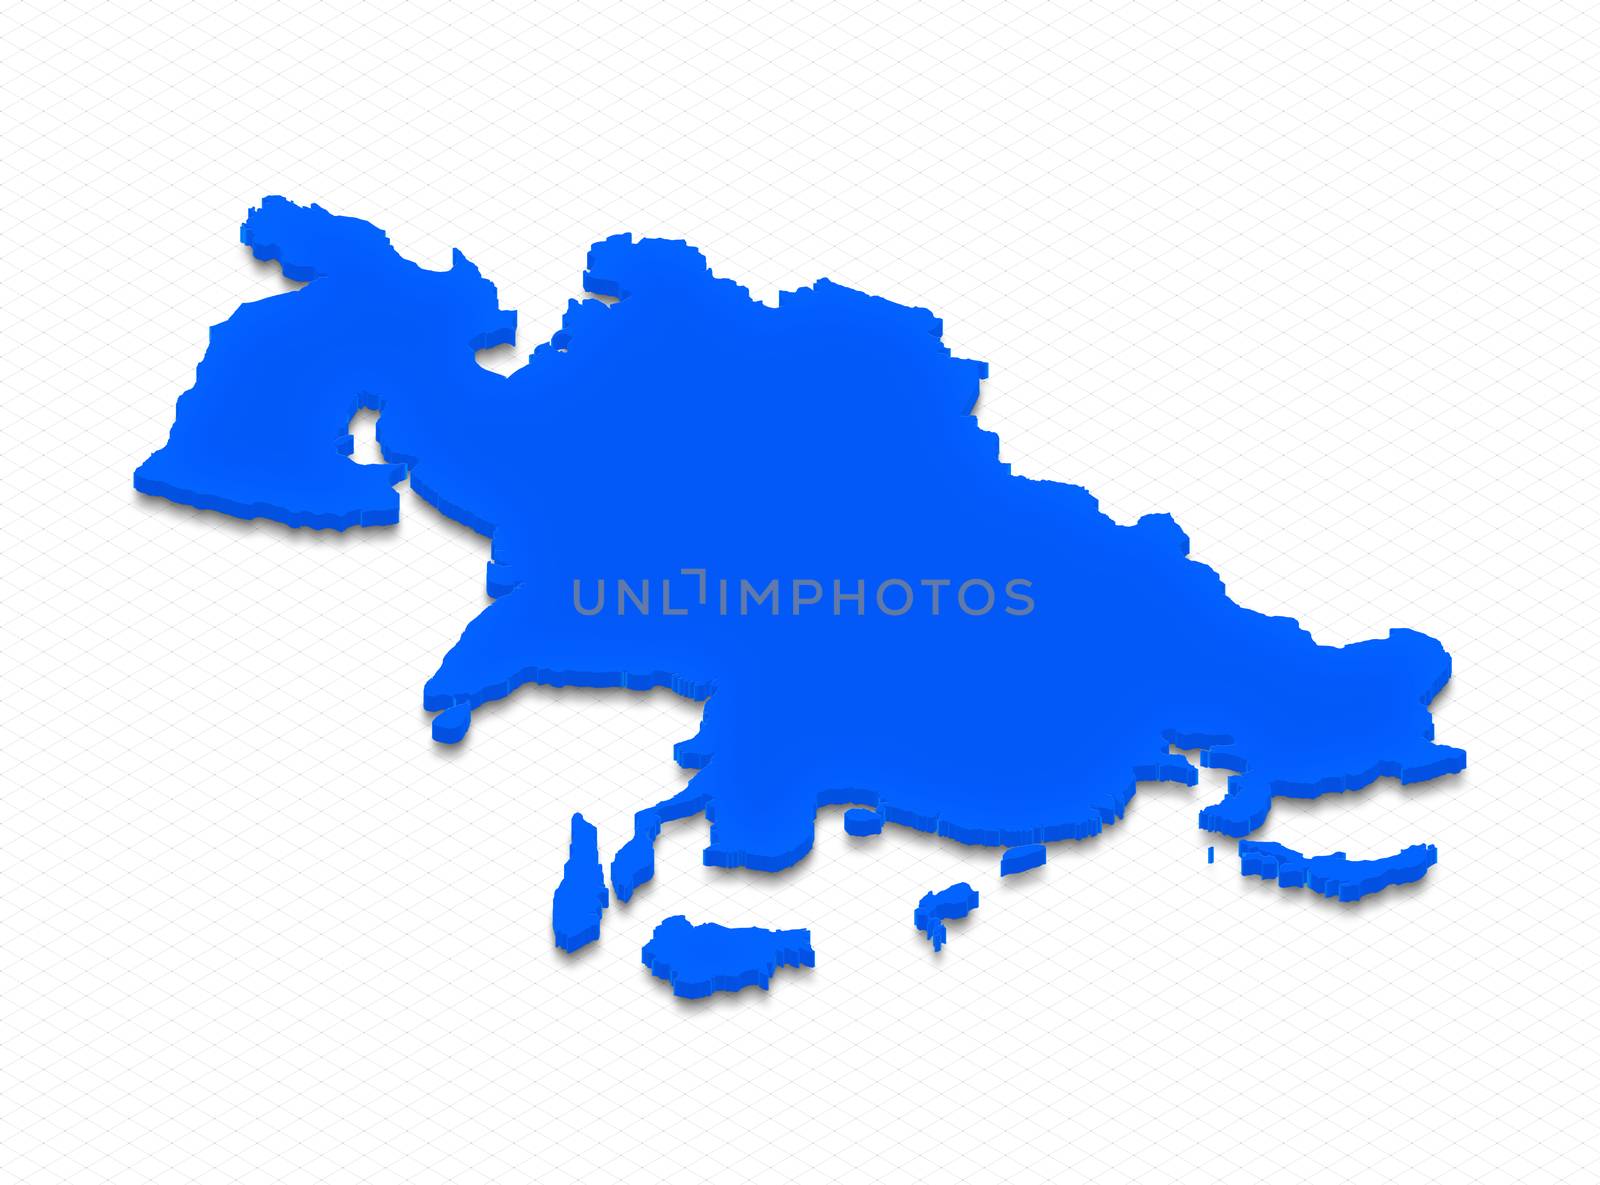 Illustration of a blue ground map of Asia on grid background. Left 3D isometric projection.